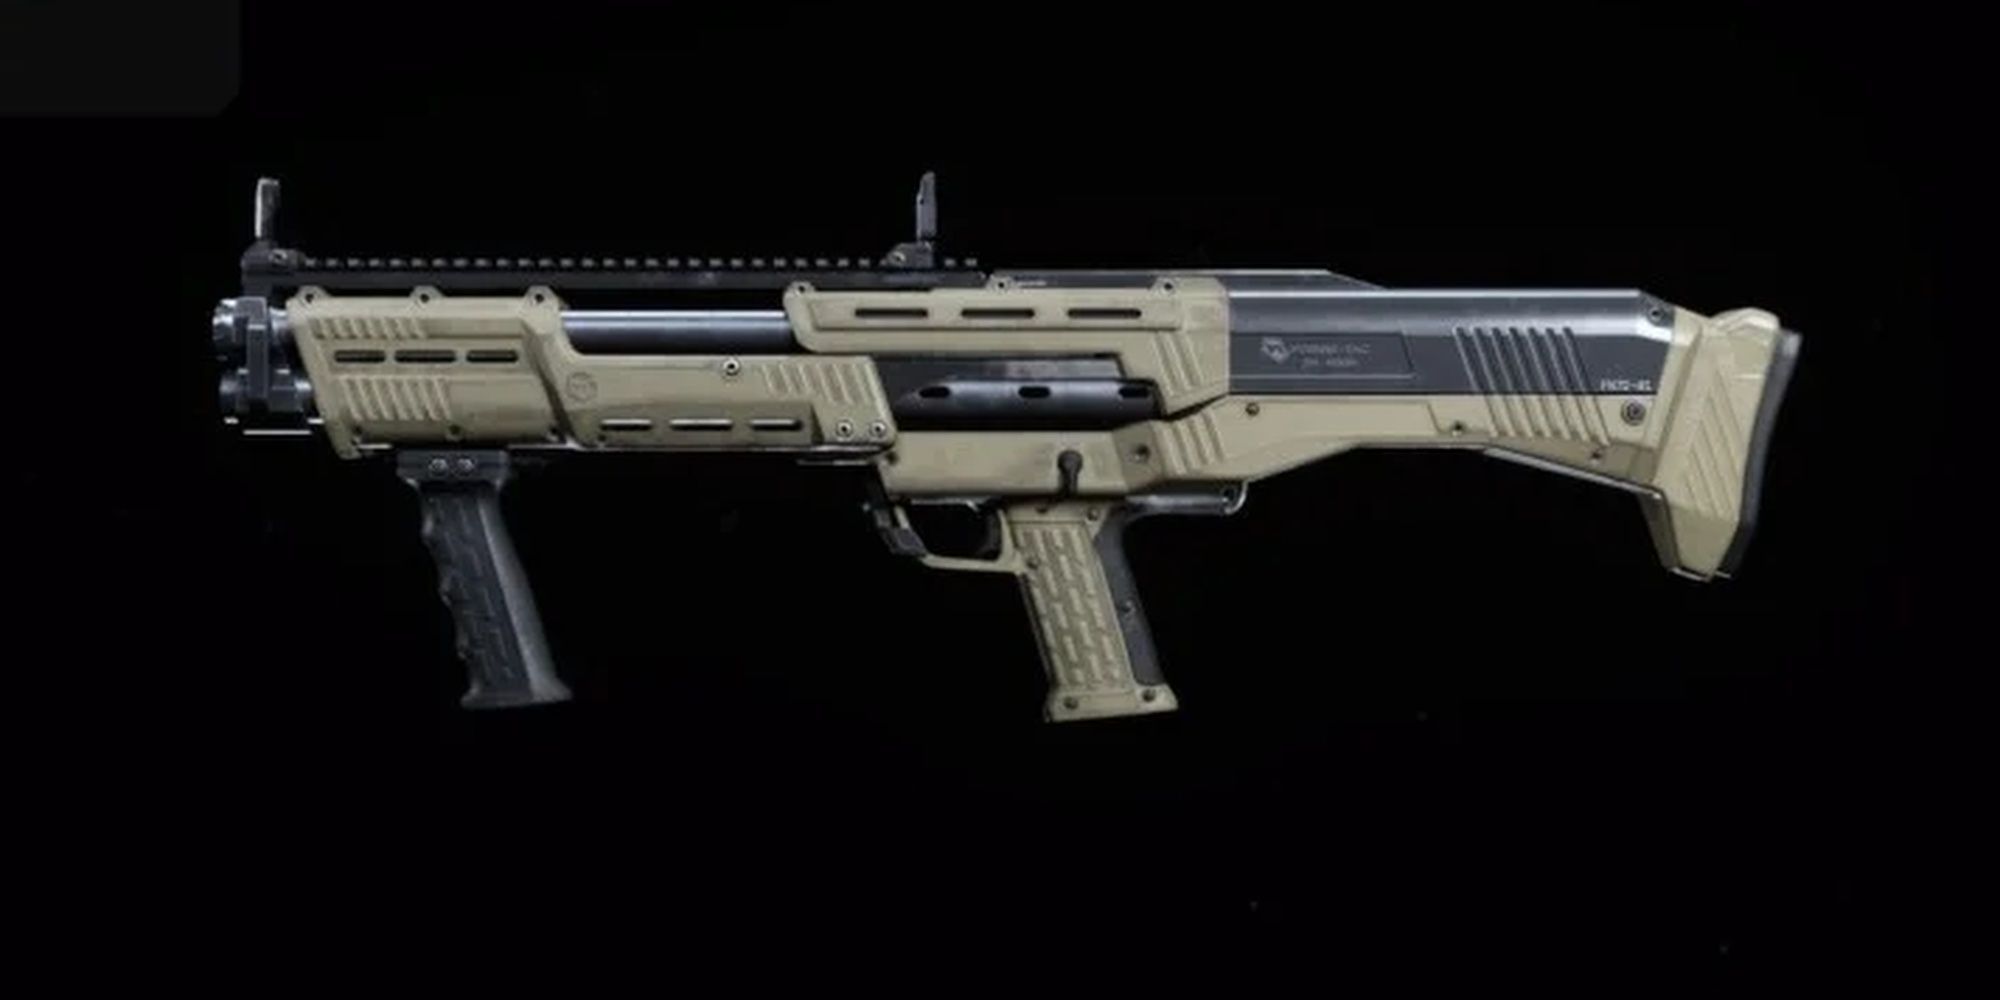 Call Of Duty Warzone: The R9 Shotgun In Profile In Weapon Viewer